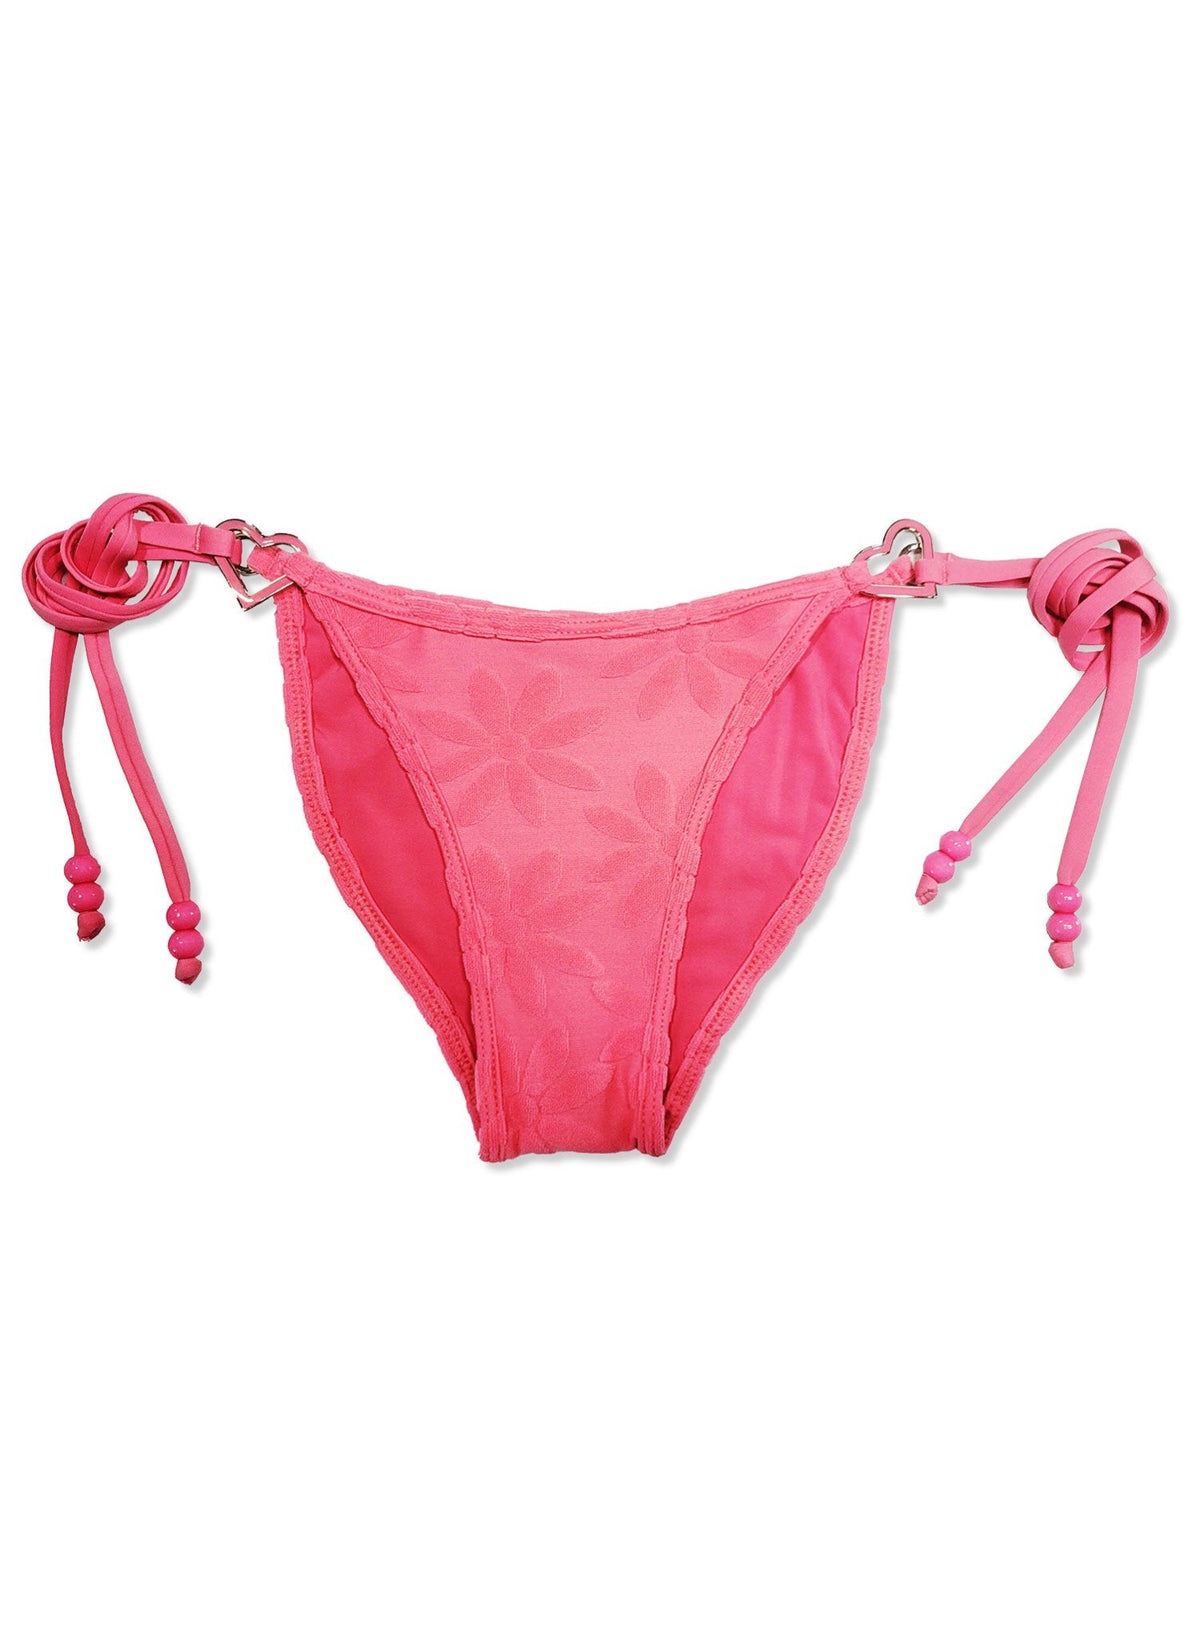 Terry Side Tie Bottom - Cheeky - Ditsy Daisy Pink